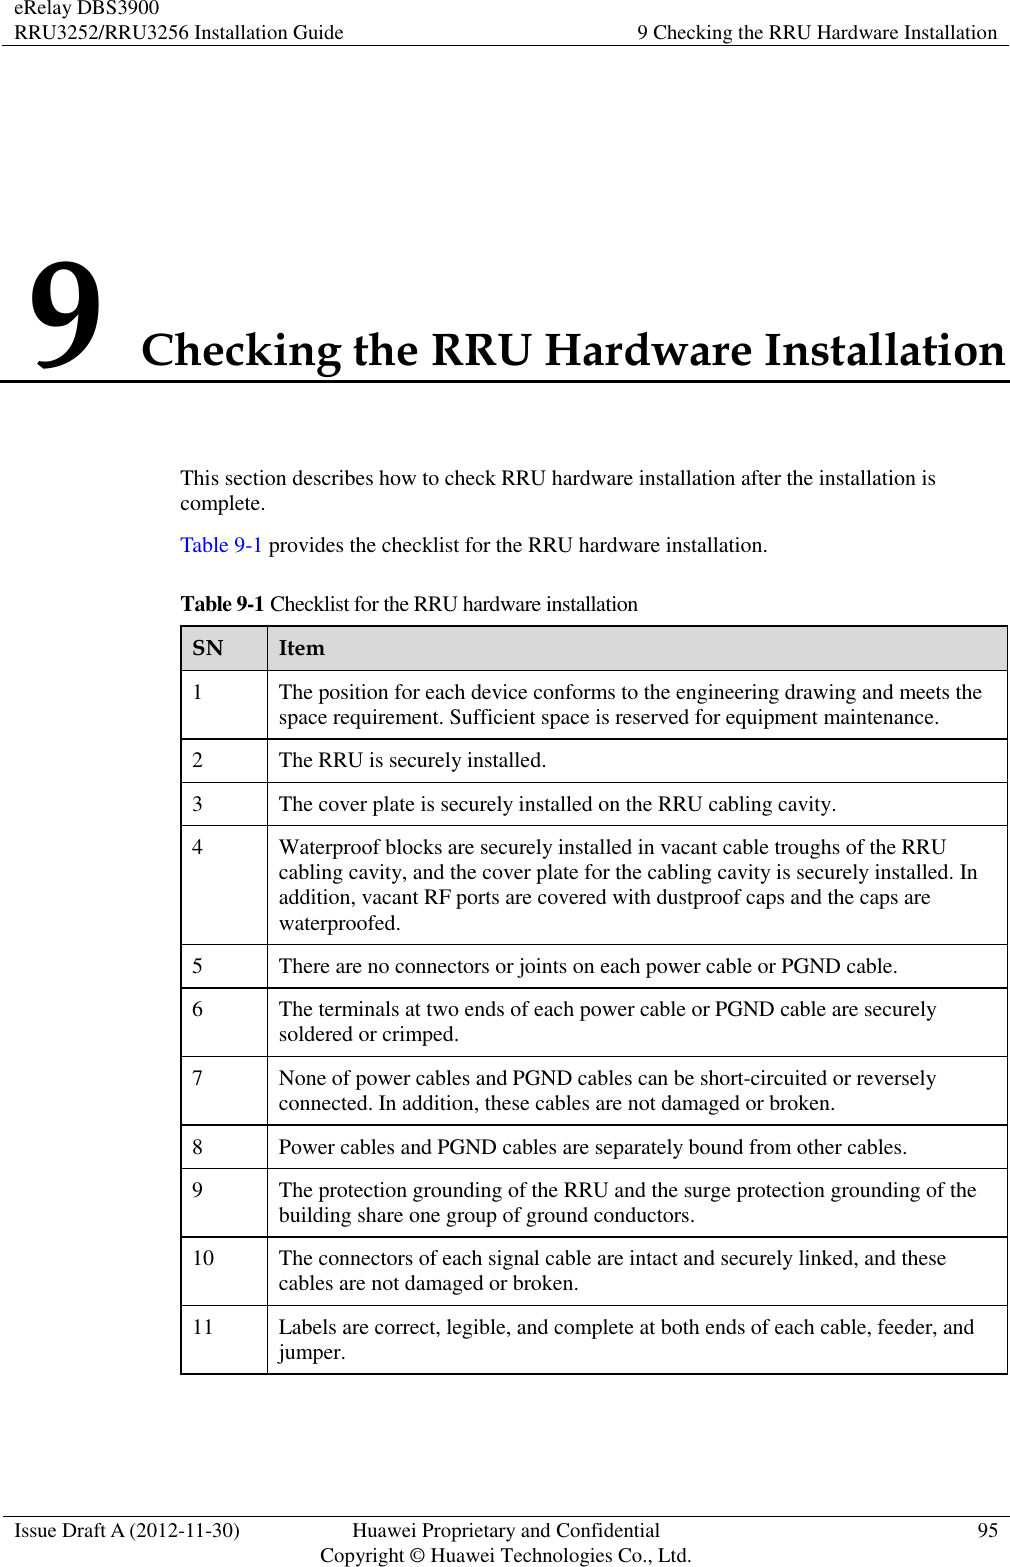 eRelay DBS3900 RRU3252/RRU3256 Installation Guide 9 Checking the RRU Hardware Installation  Issue Draft A (2012-11-30) Huawei Proprietary and Confidential                                     Copyright © Huawei Technologies Co., Ltd. 95  9 Checking the RRU Hardware Installation This section describes how to check RRU hardware installation after the installation is complete.   Table 9-1 provides the checklist for the RRU hardware installation. Table 9-1 Checklist for the RRU hardware installation SN Item 1 The position for each device conforms to the engineering drawing and meets the space requirement. Sufficient space is reserved for equipment maintenance.   2 The RRU is securely installed. 3 The cover plate is securely installed on the RRU cabling cavity.   4 Waterproof blocks are securely installed in vacant cable troughs of the RRU cabling cavity, and the cover plate for the cabling cavity is securely installed. In addition, vacant RF ports are covered with dustproof caps and the caps are waterproofed.   5 There are no connectors or joints on each power cable or PGND cable.   6 The terminals at two ends of each power cable or PGND cable are securely soldered or crimped. 7 None of power cables and PGND cables can be short-circuited or reversely connected. In addition, these cables are not damaged or broken. 8 Power cables and PGND cables are separately bound from other cables. 9 The protection grounding of the RRU and the surge protection grounding of the building share one group of ground conductors. 10 The connectors of each signal cable are intact and securely linked, and these cables are not damaged or broken. 11 Labels are correct, legible, and complete at both ends of each cable, feeder, and jumper.   